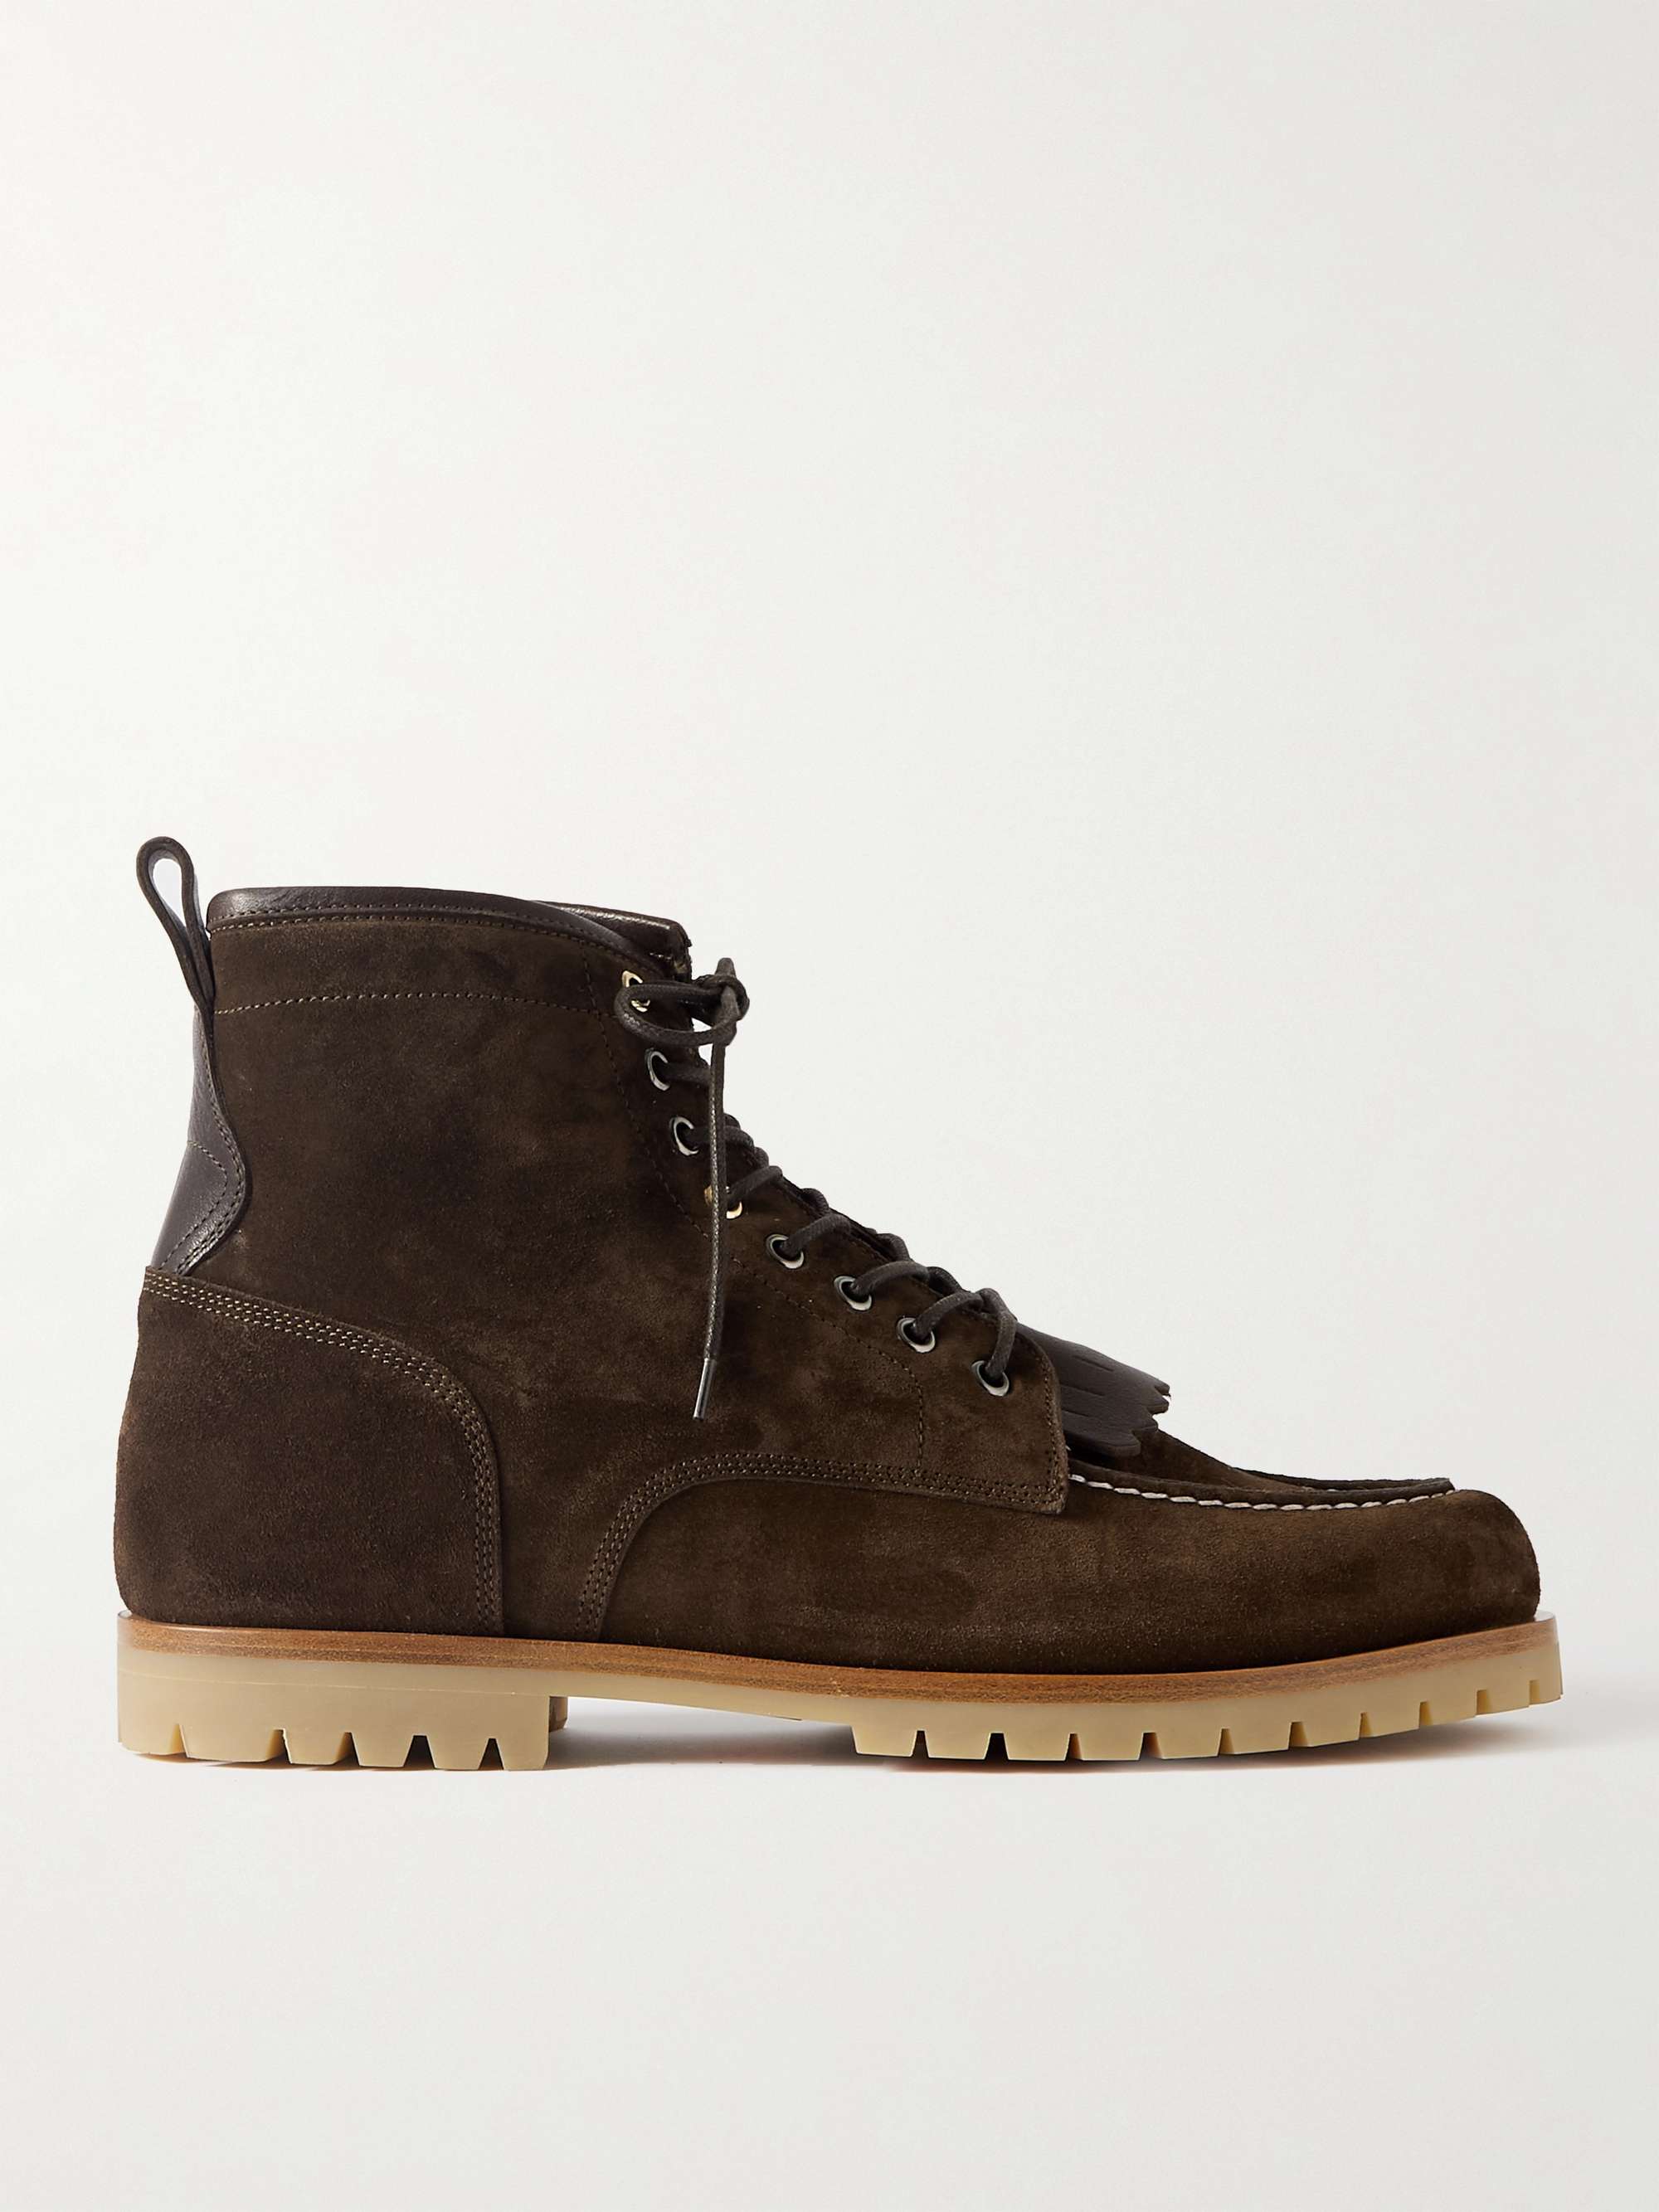 PAUL SMITH Jarmush Leather-Trimmed Suede Boots | MR PORTER